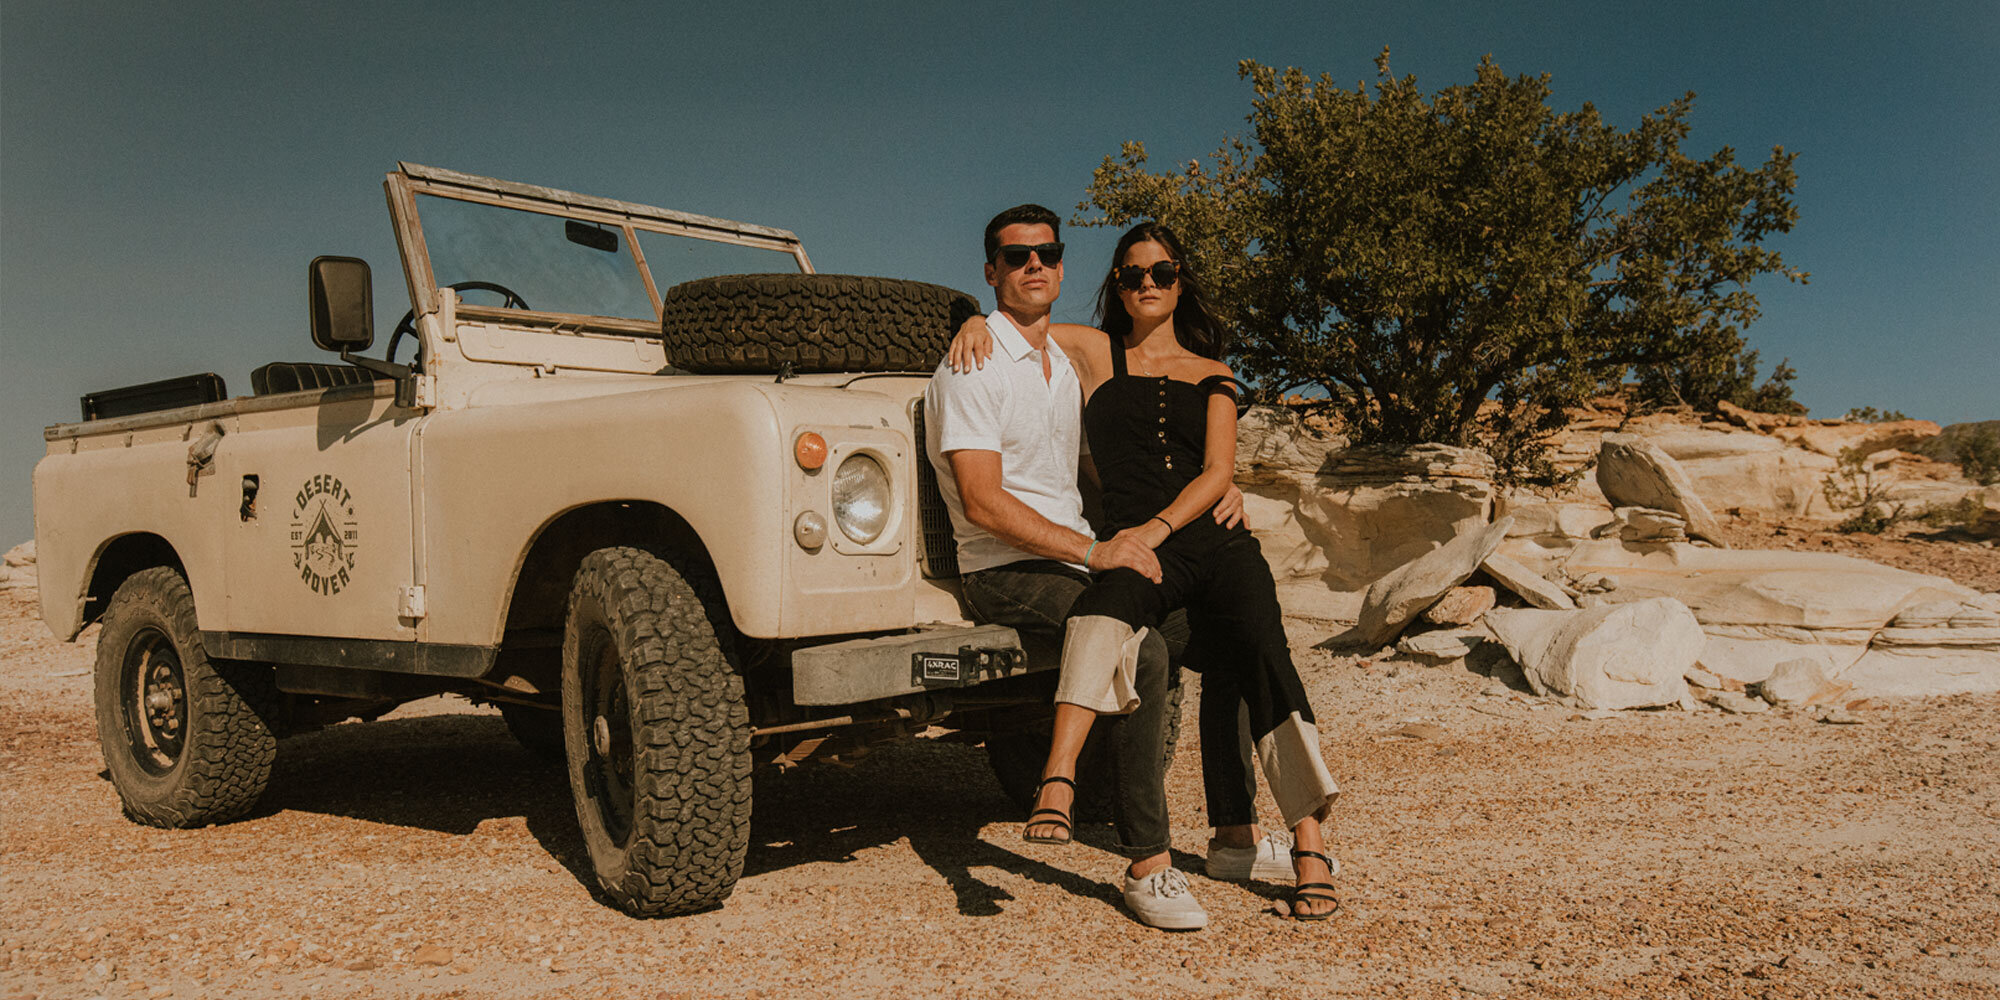 New Mexico Adventure Elopement at Cabazon, NM